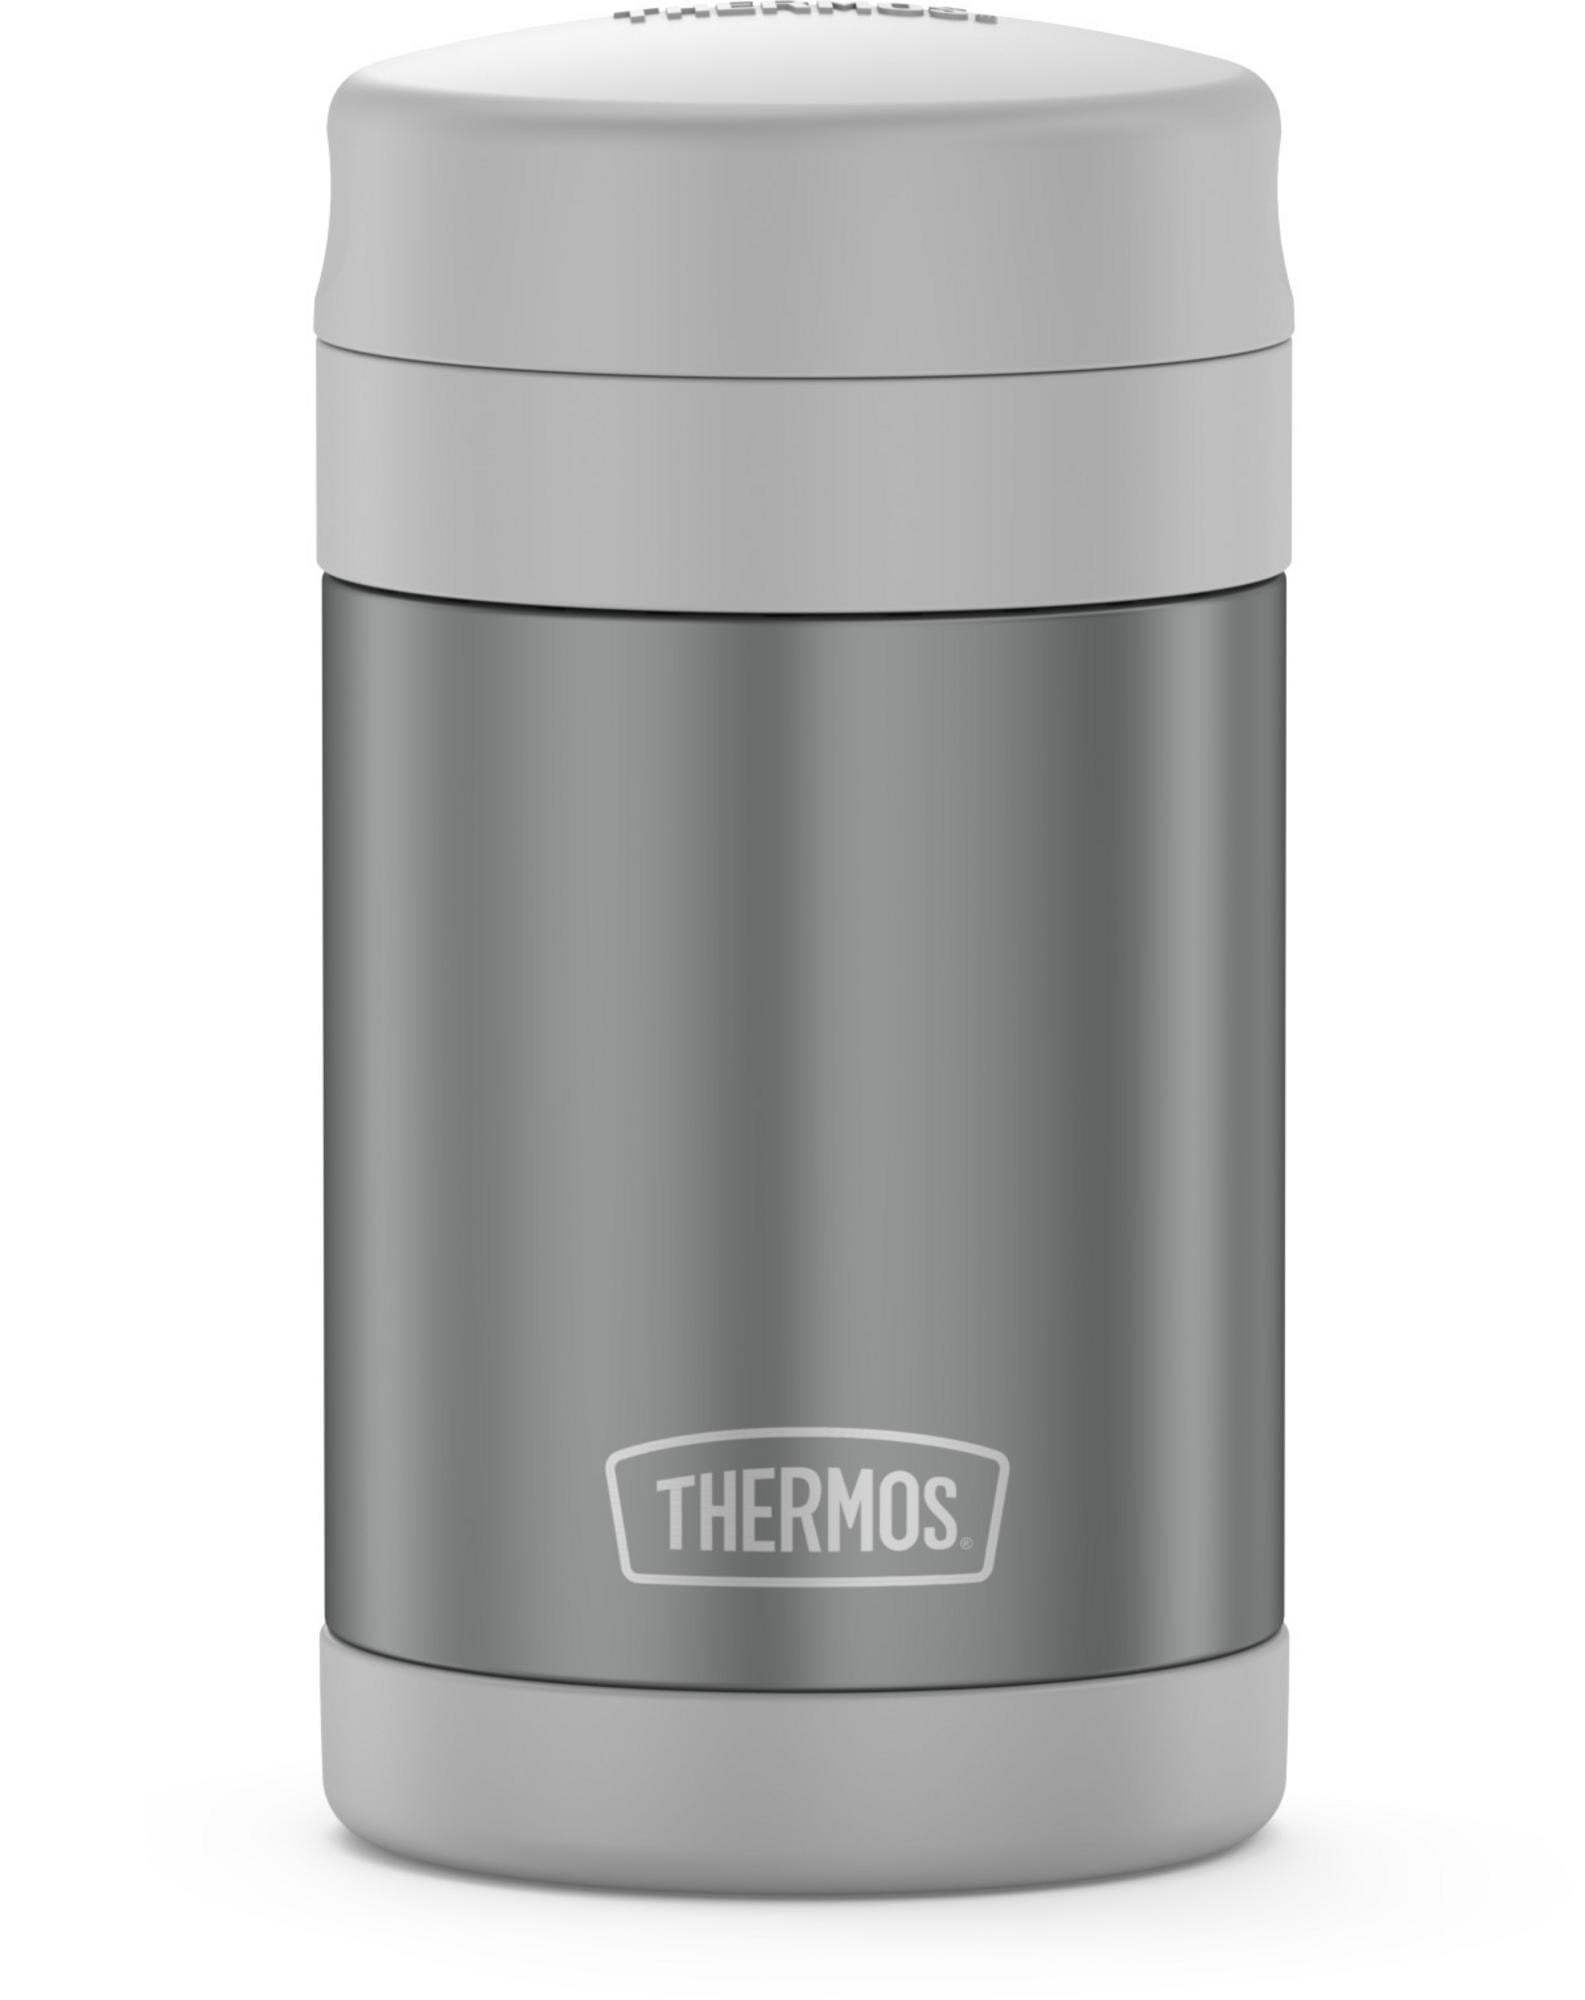 Thermos F31101sl6 16-Ounce Funtainer Vacuum-Insulated Stainless Steel Food Jar with Folding Spoon (Stone Slate)